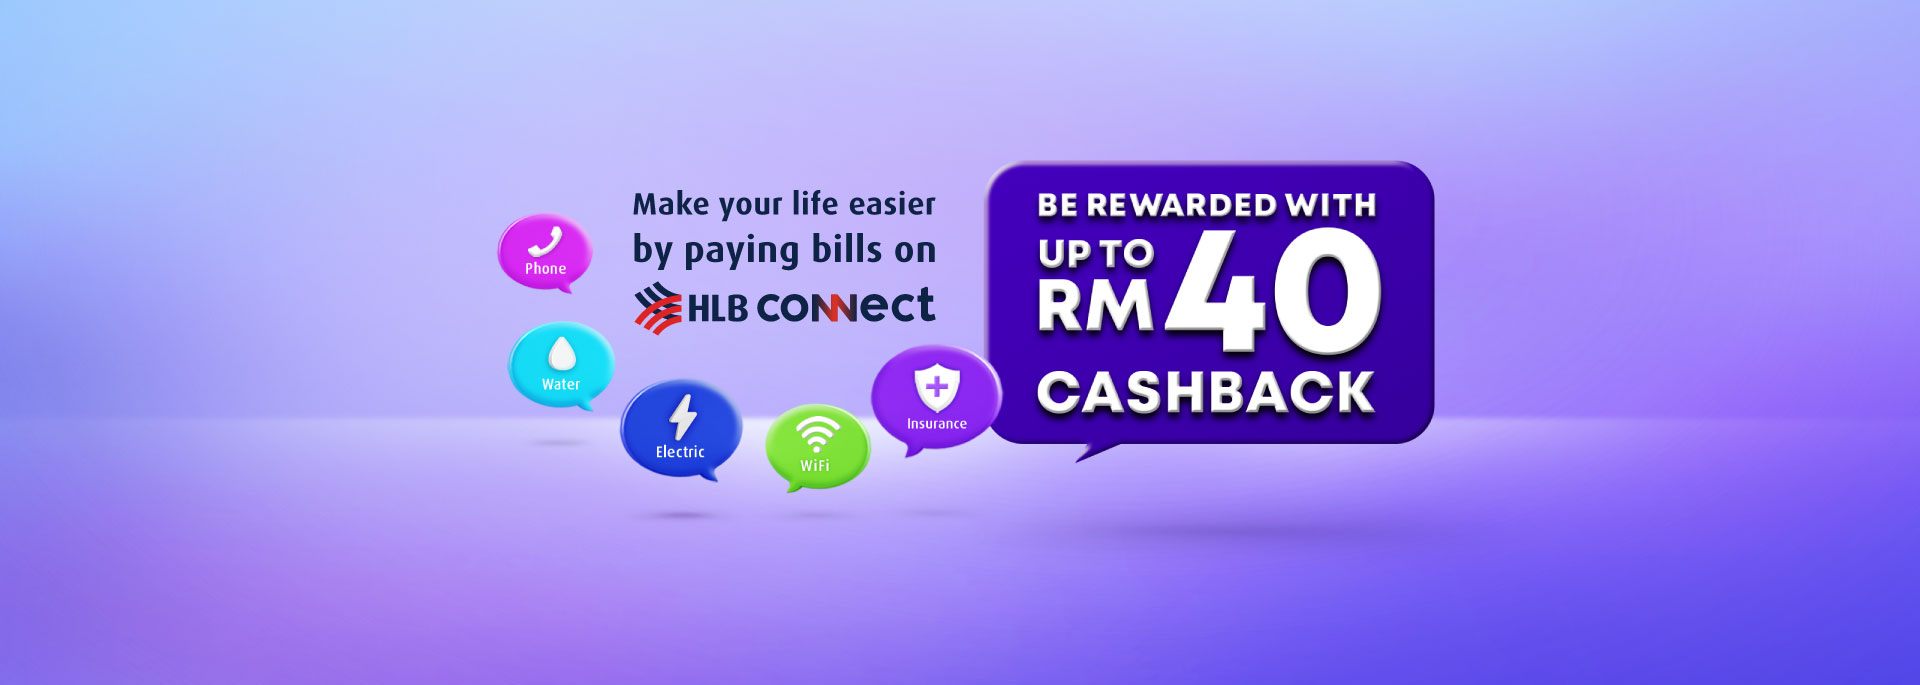 Be rewarded with up to RM40 cashback